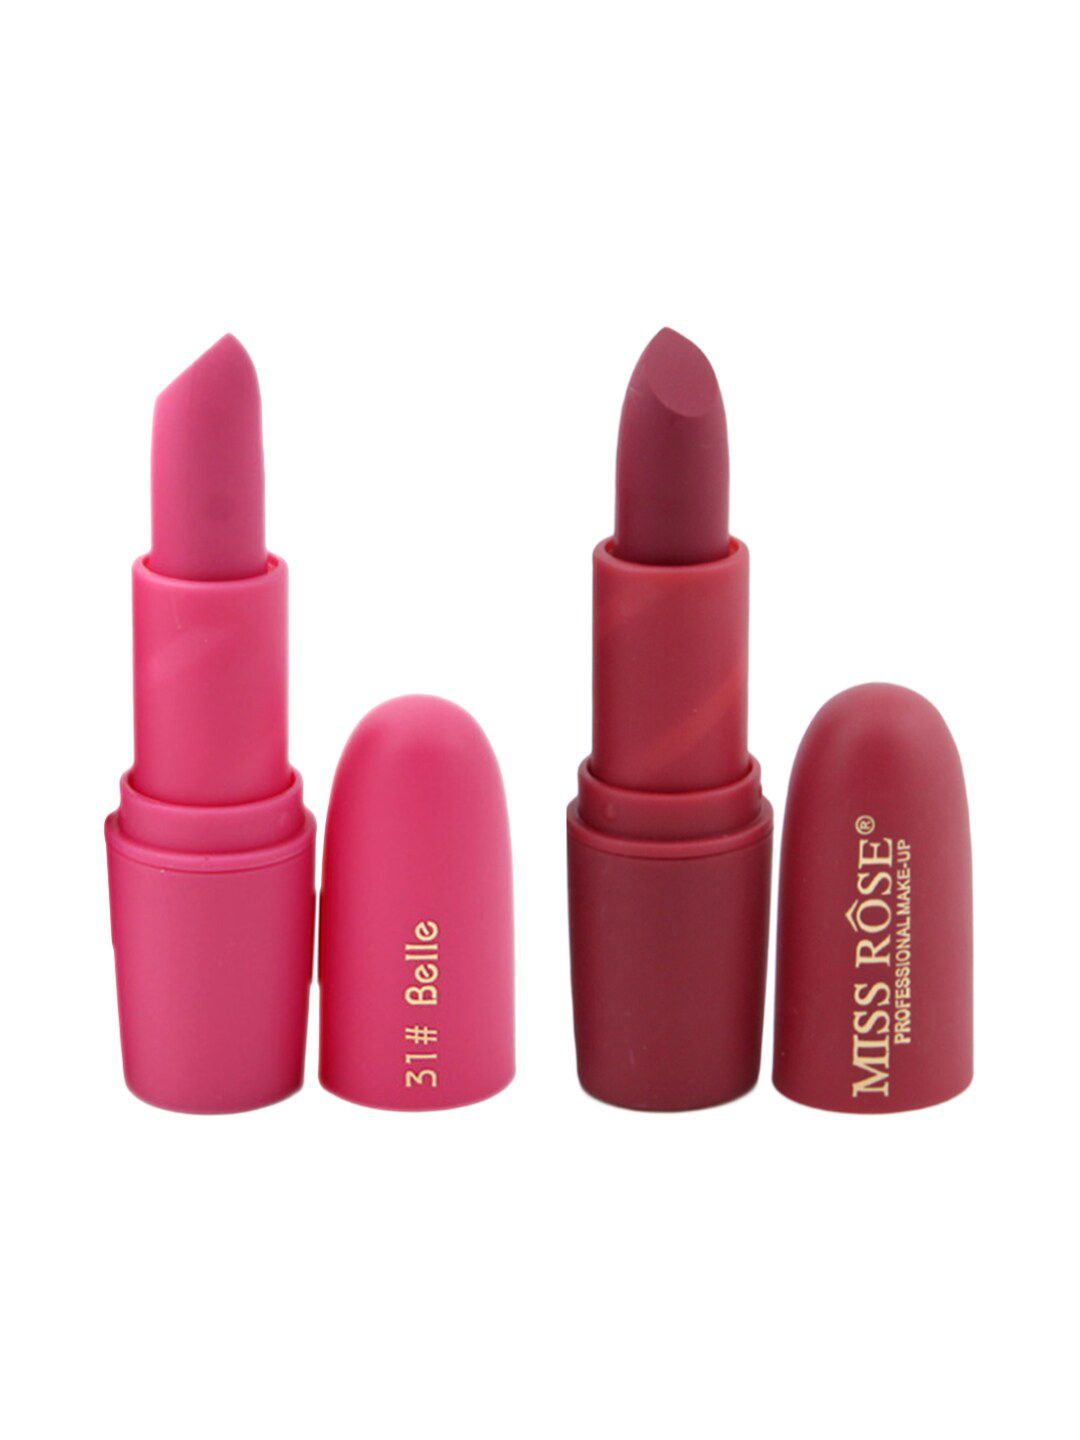 MISS ROSE Professional Make-Up Set of 2 Matte Creamy Lipsticks - Belle 31 & Chii 49 Price in India